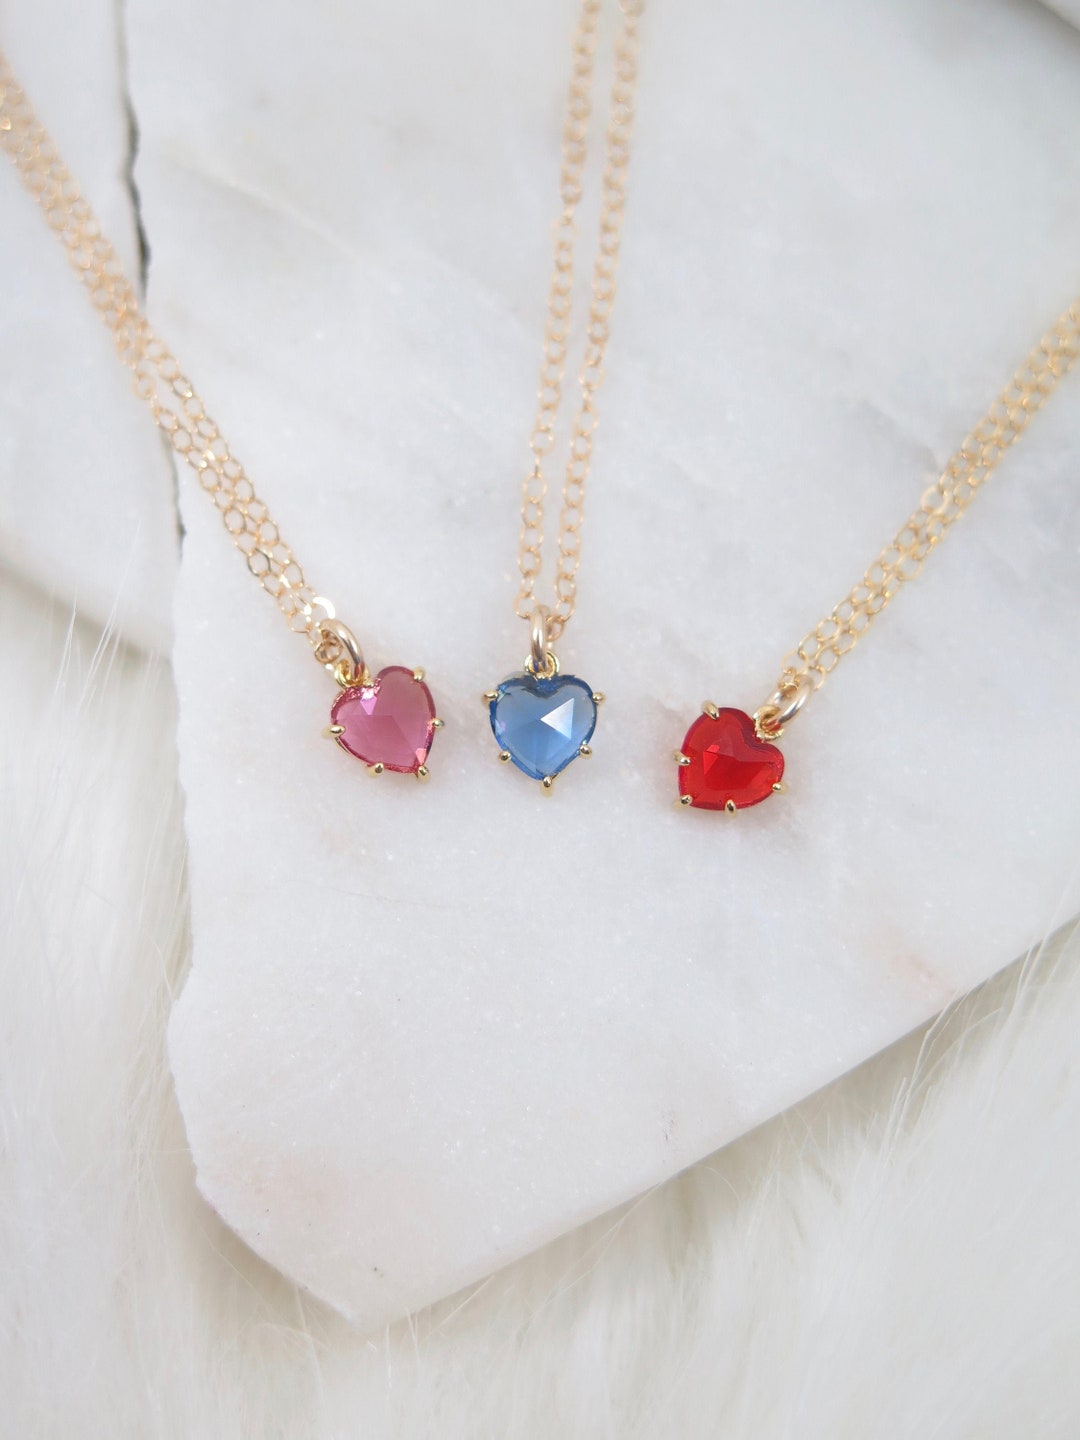 Tiny Heart Necklace Gold Heart Necklace Stacking Necklace - Etsy